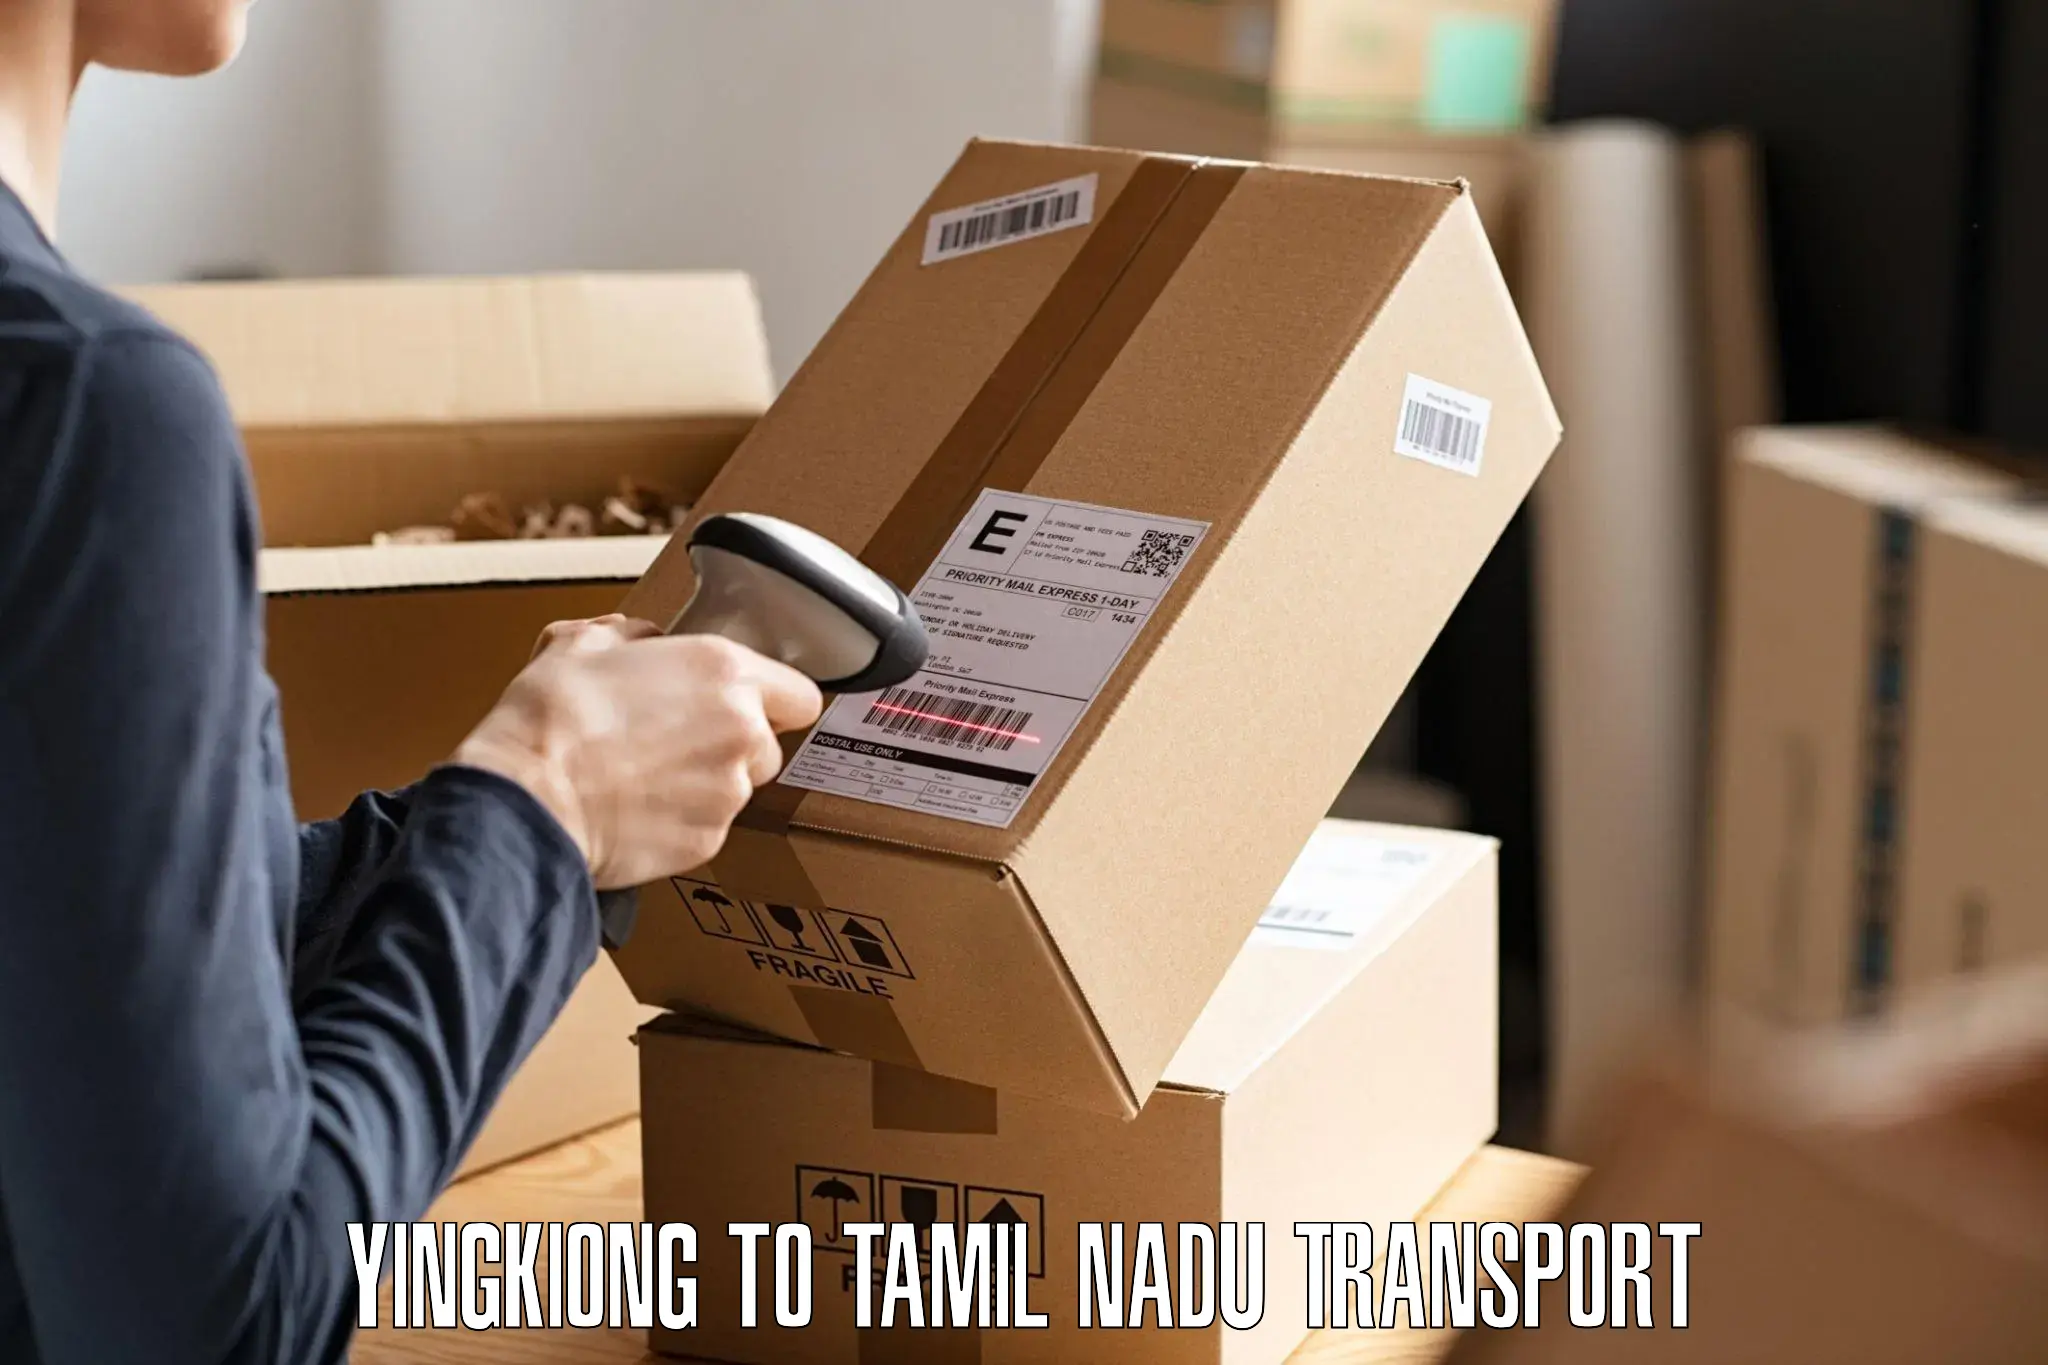 Commercial transport service Yingkiong to Chennai Port